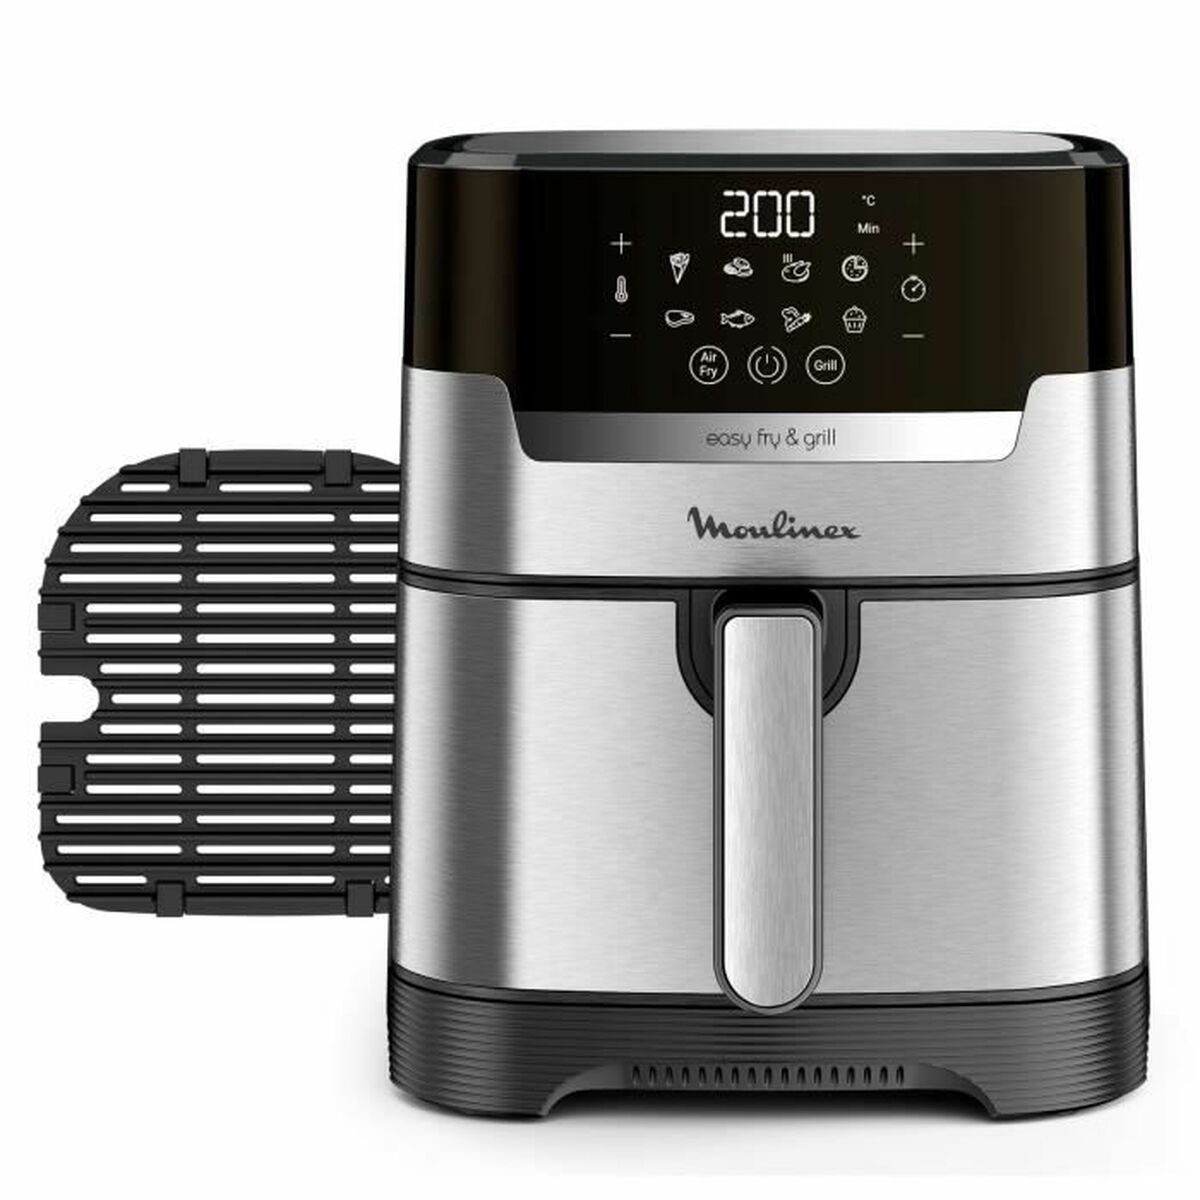 Luchtfriteuse Moulinex Easy Fry Grill EZ505D 1400 W 4,2 L